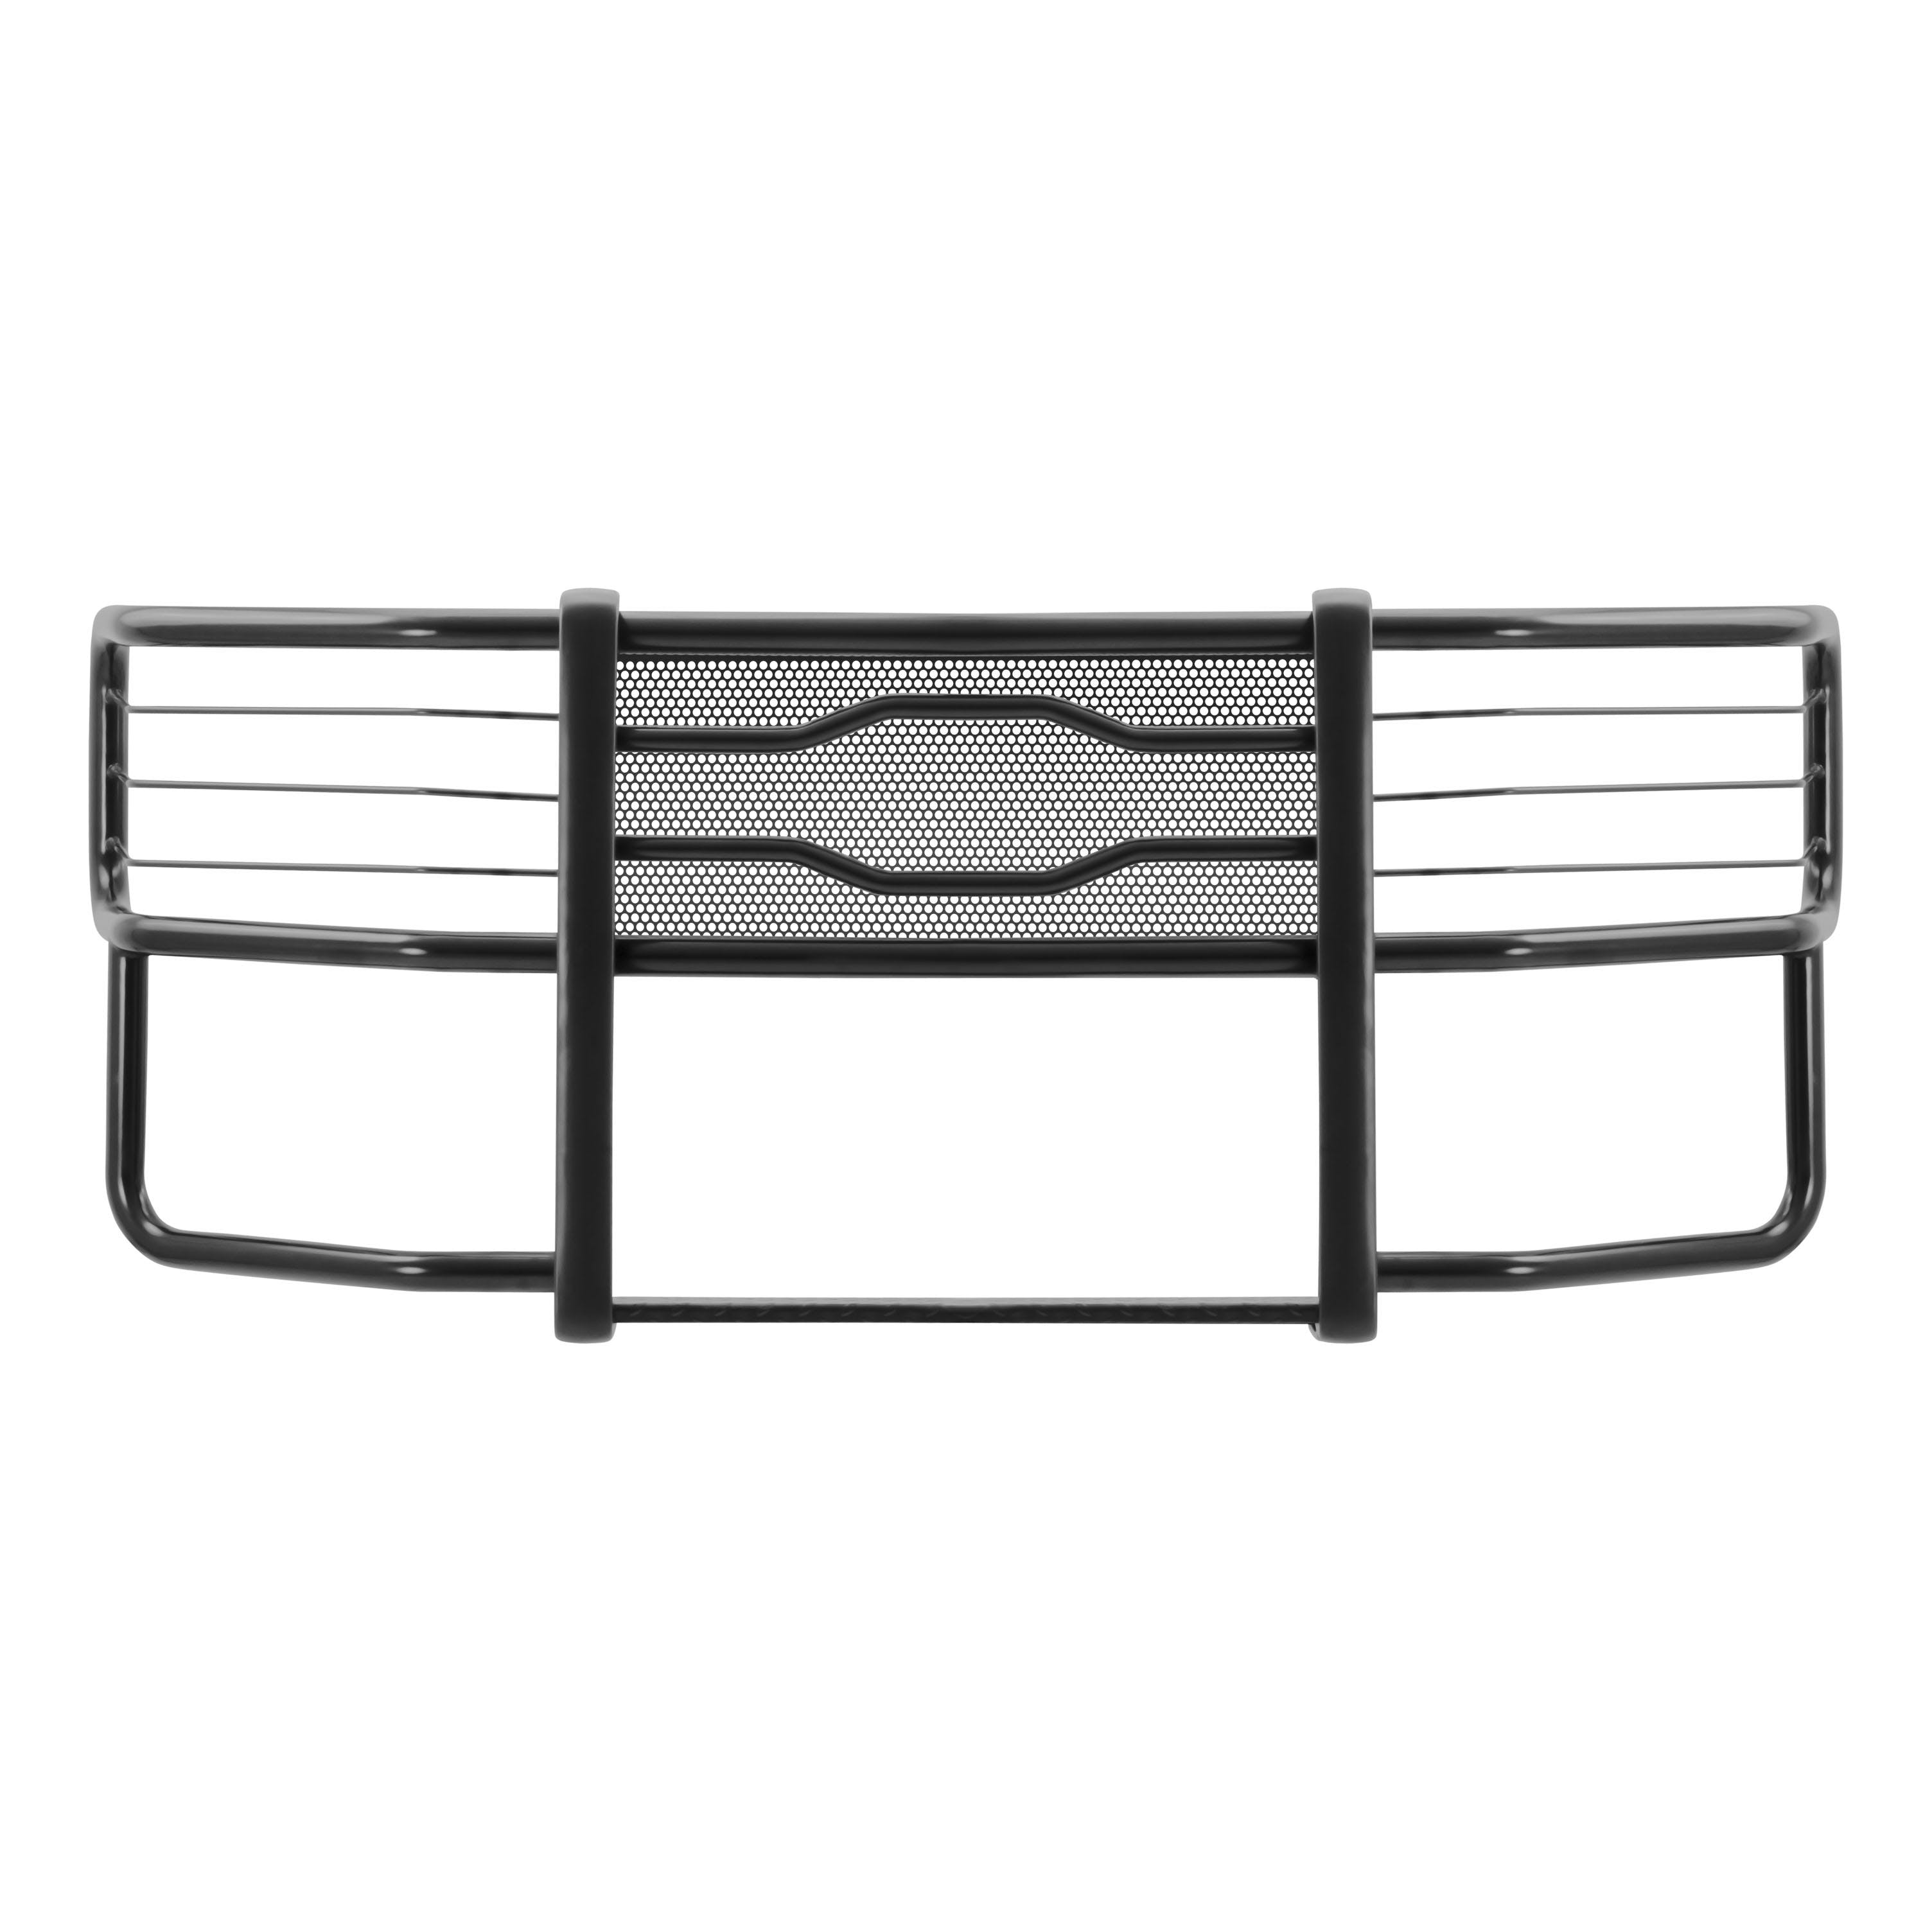 LUVERNE 320713-321542 Prowler Max Grille Guard